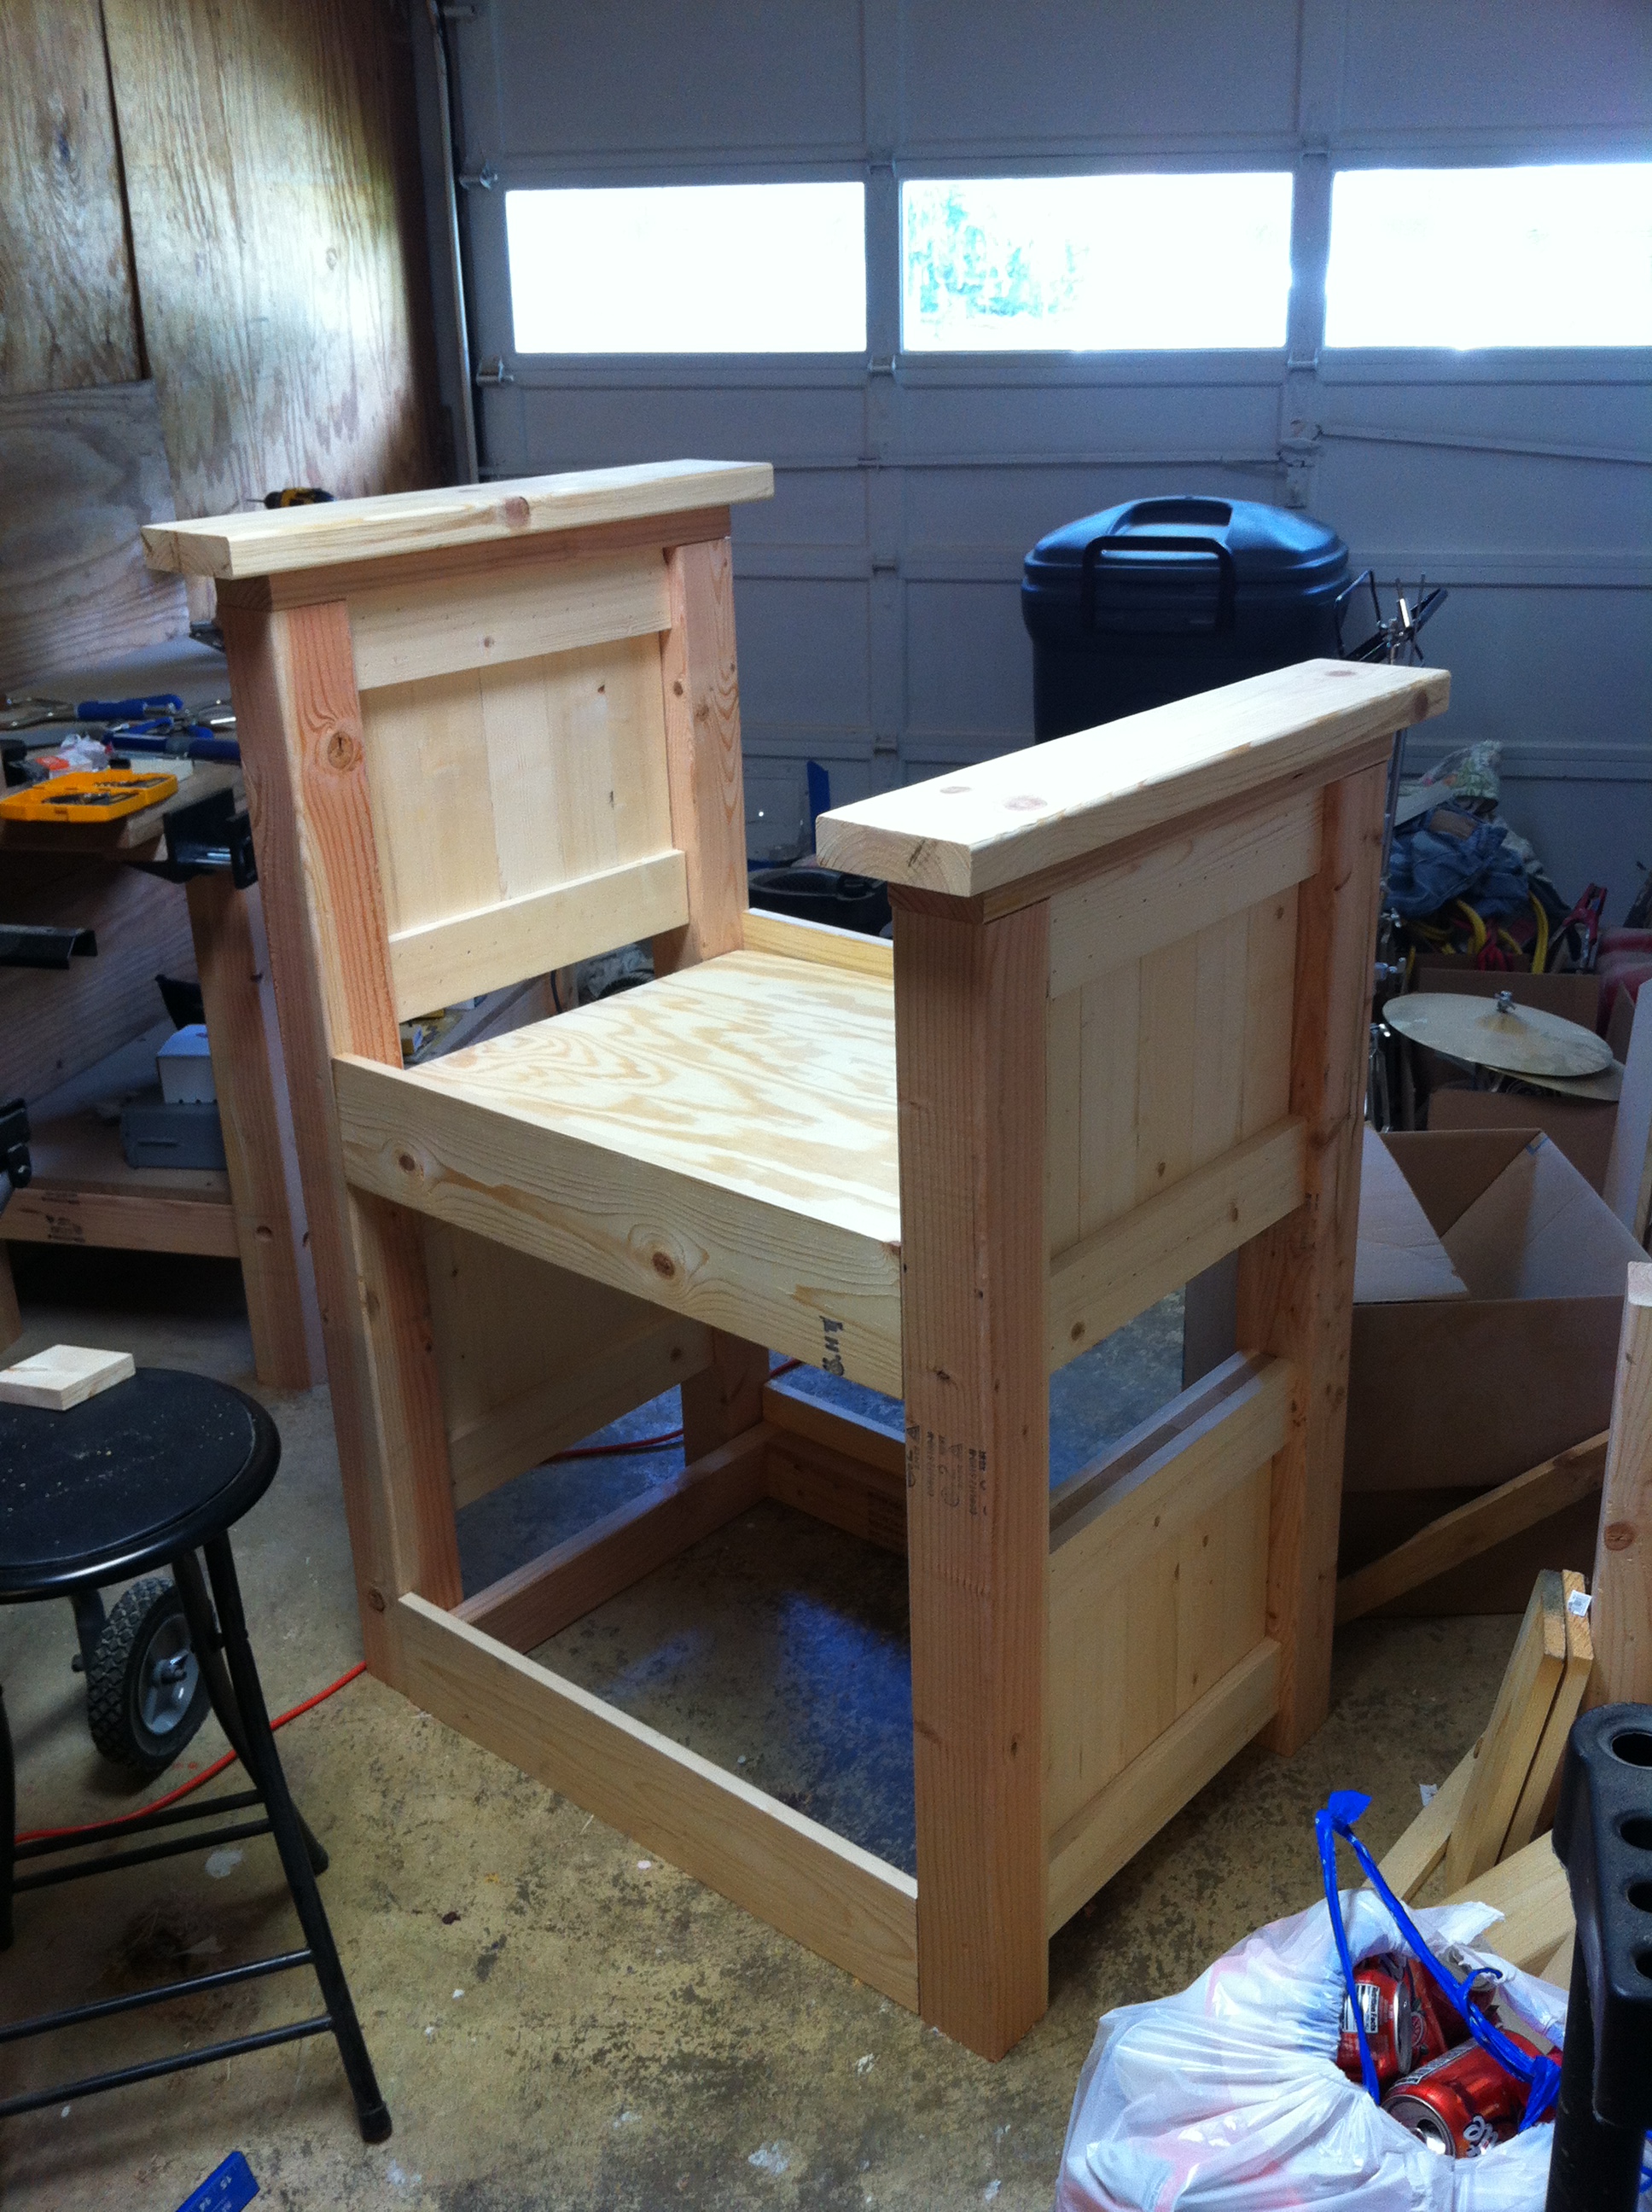 Doggy Bunk Bed Ana White, Homemade Dog Bunk Beds